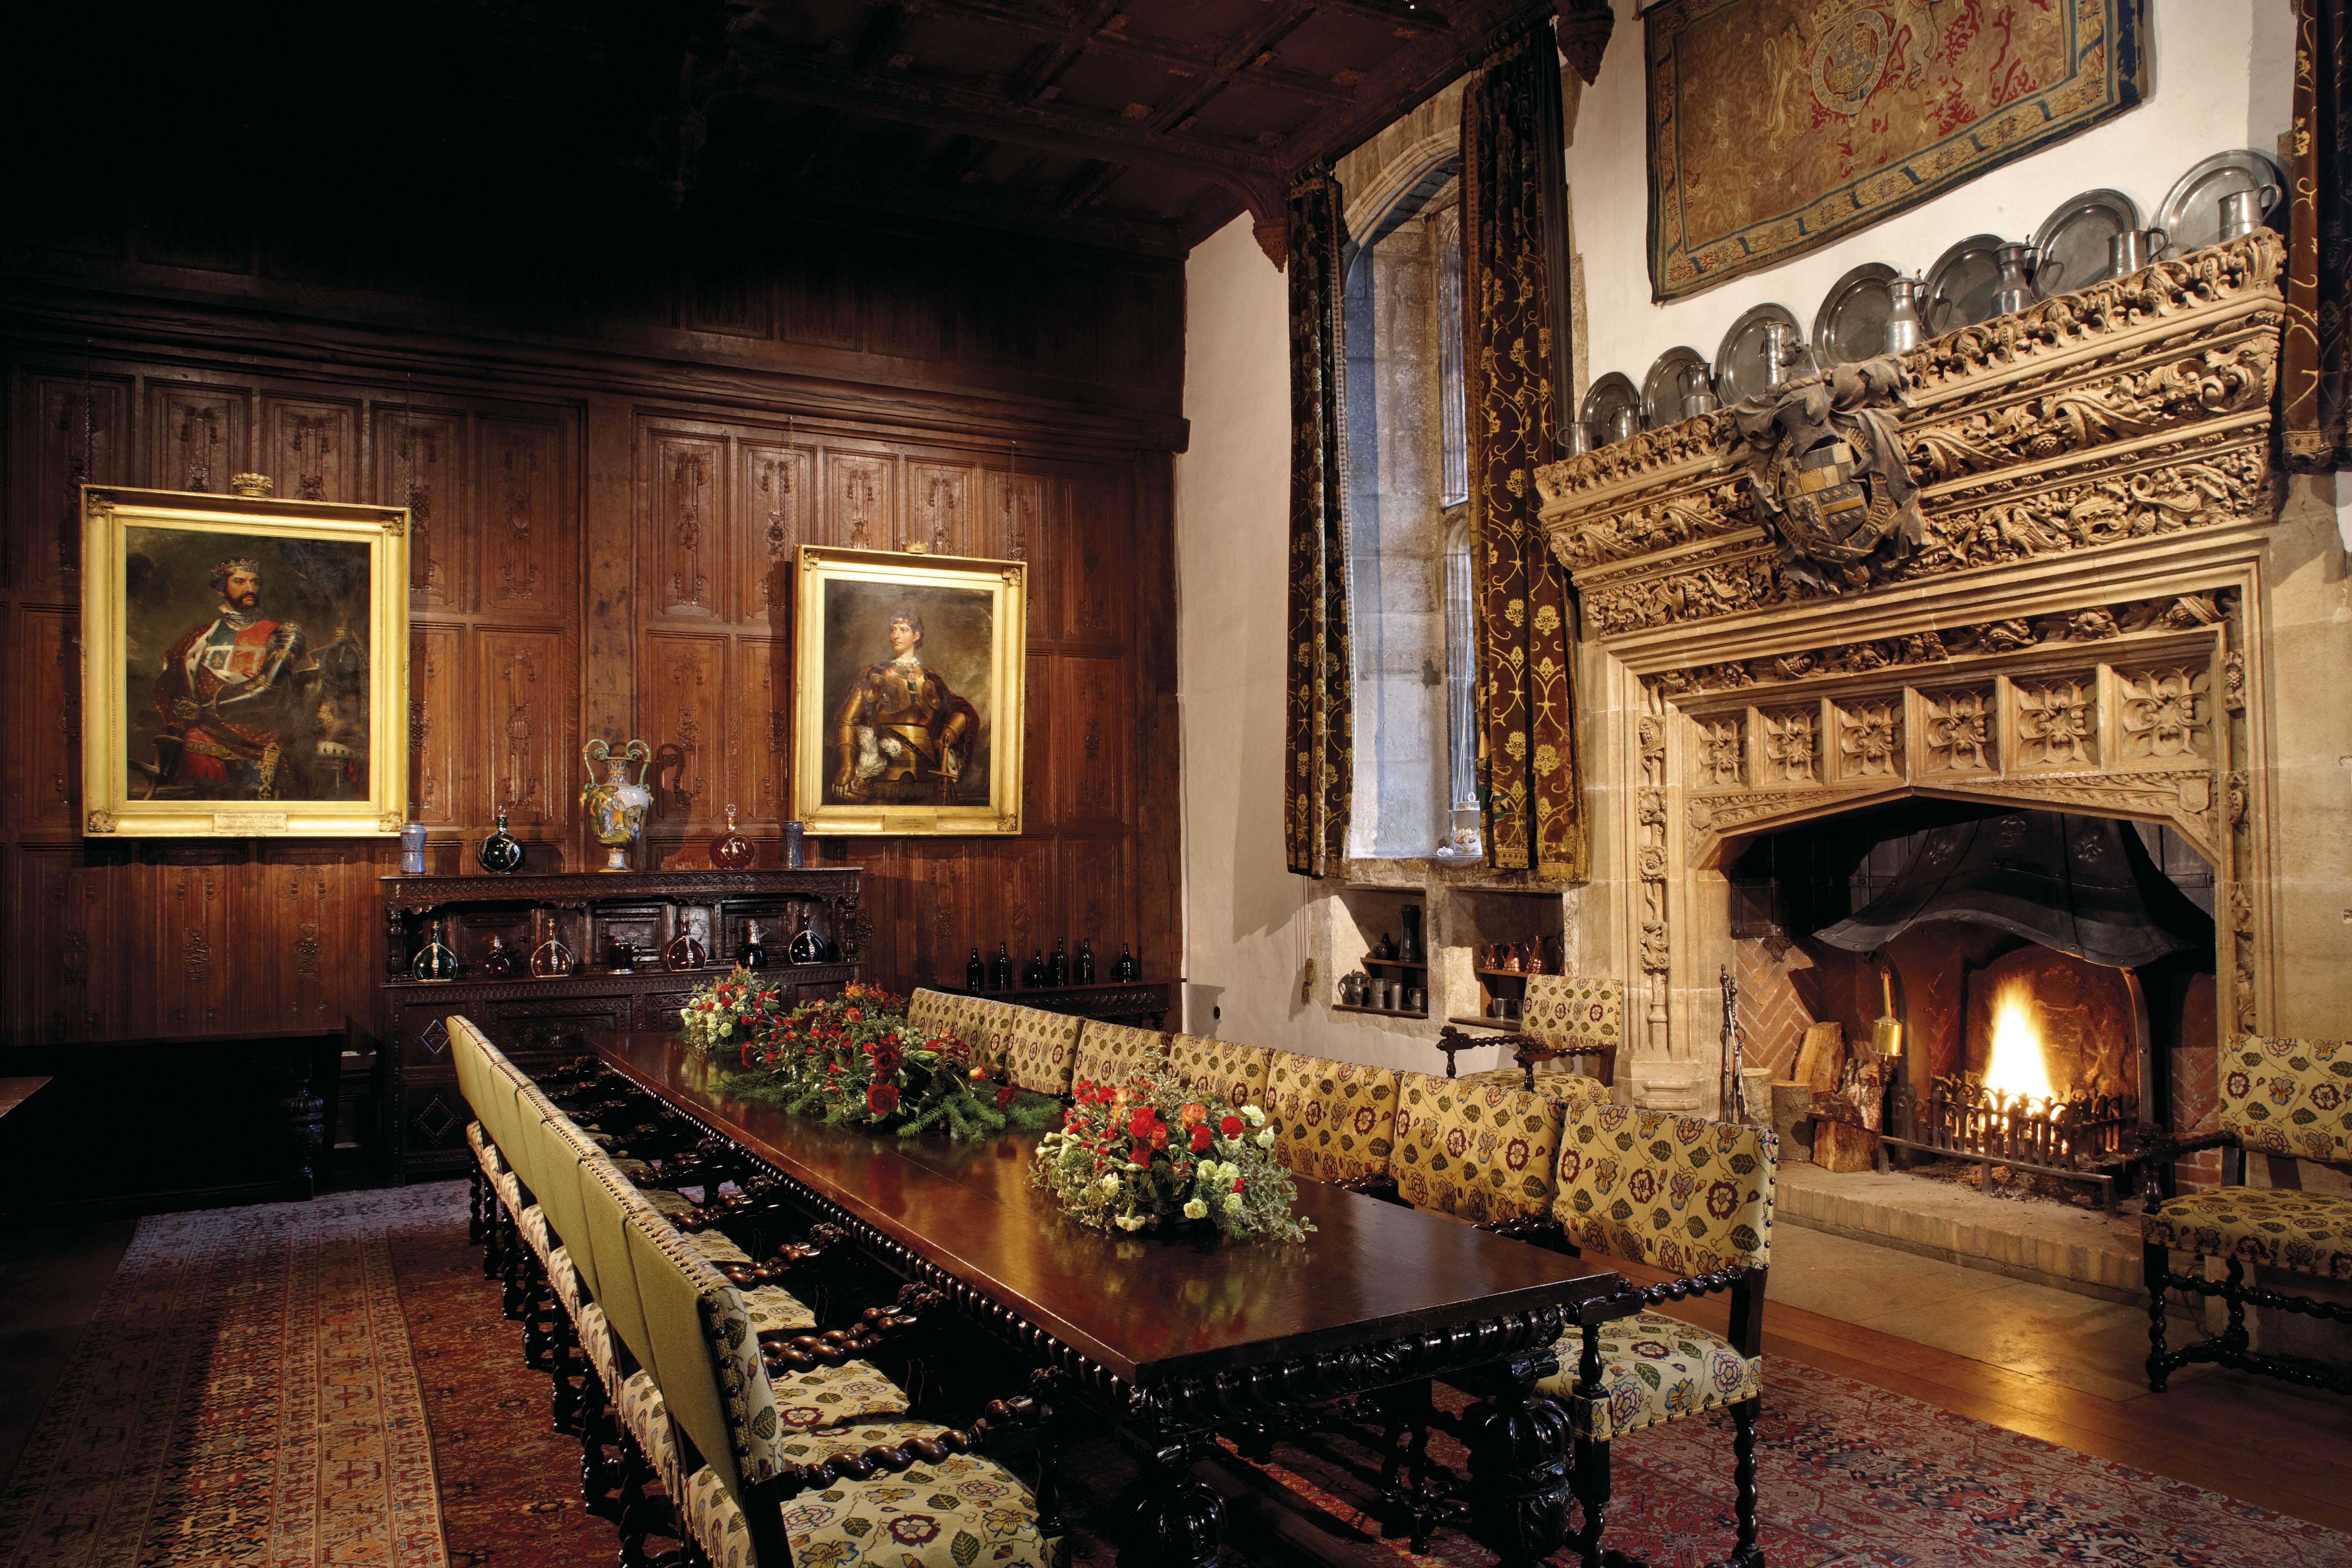 The Great Hall at Hever